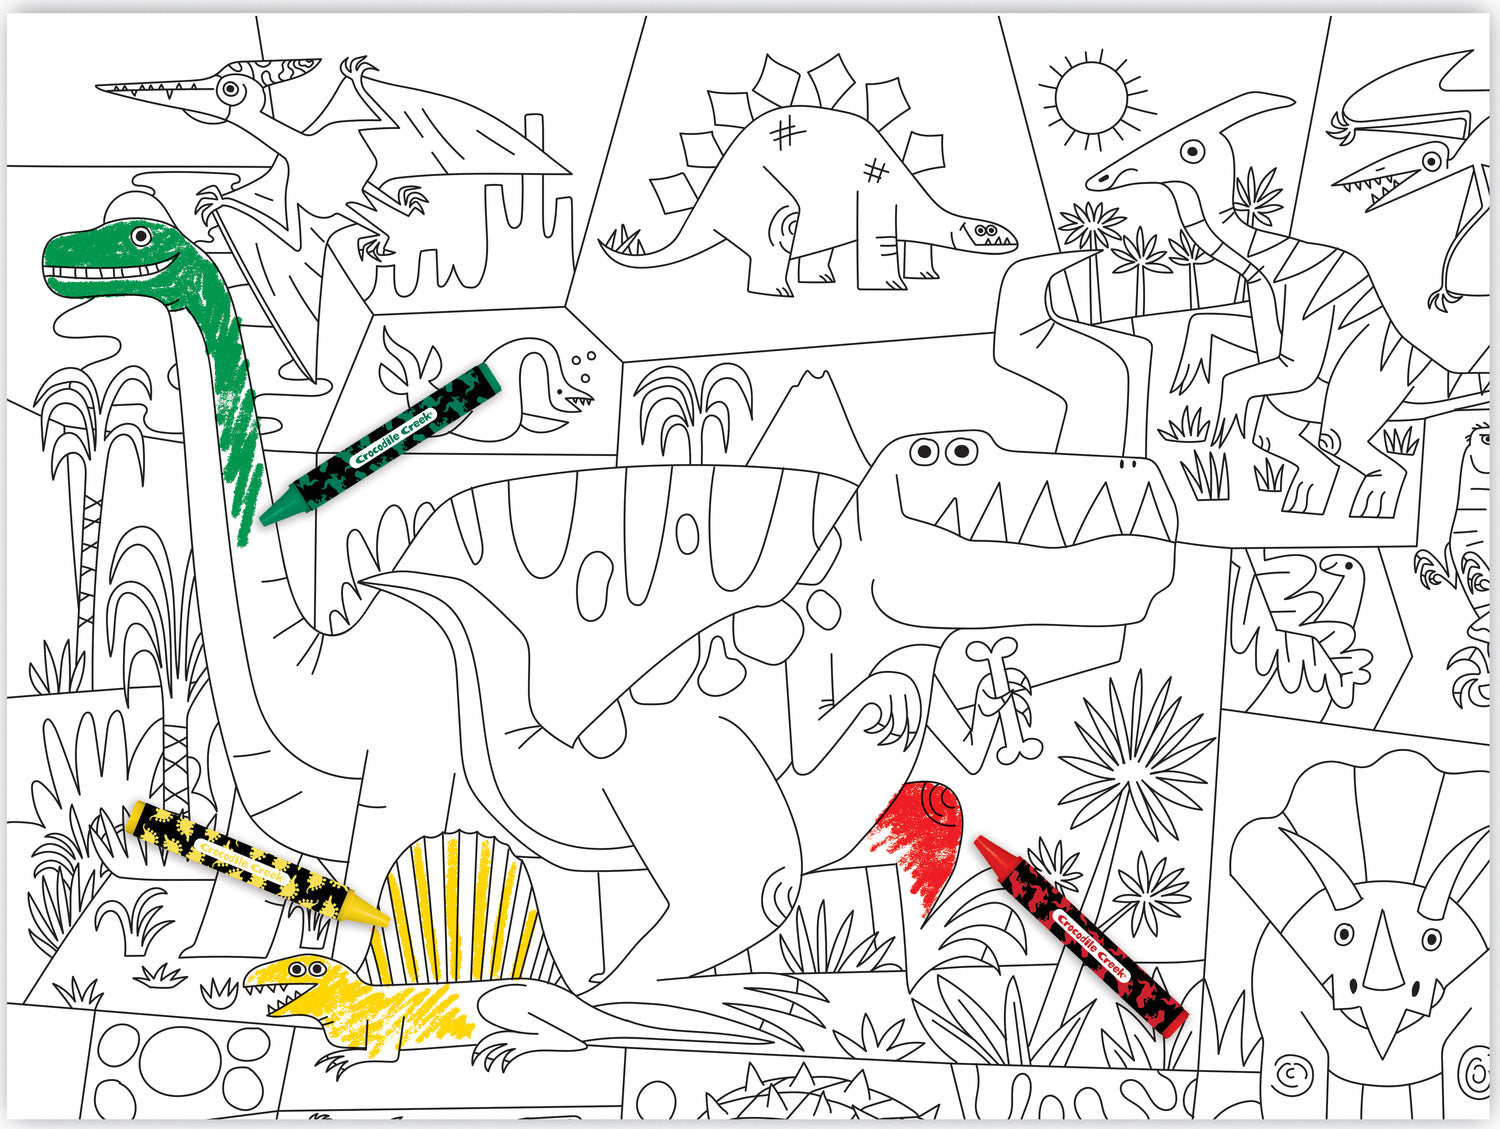 Color a Poster with Crayons - Dinosaur